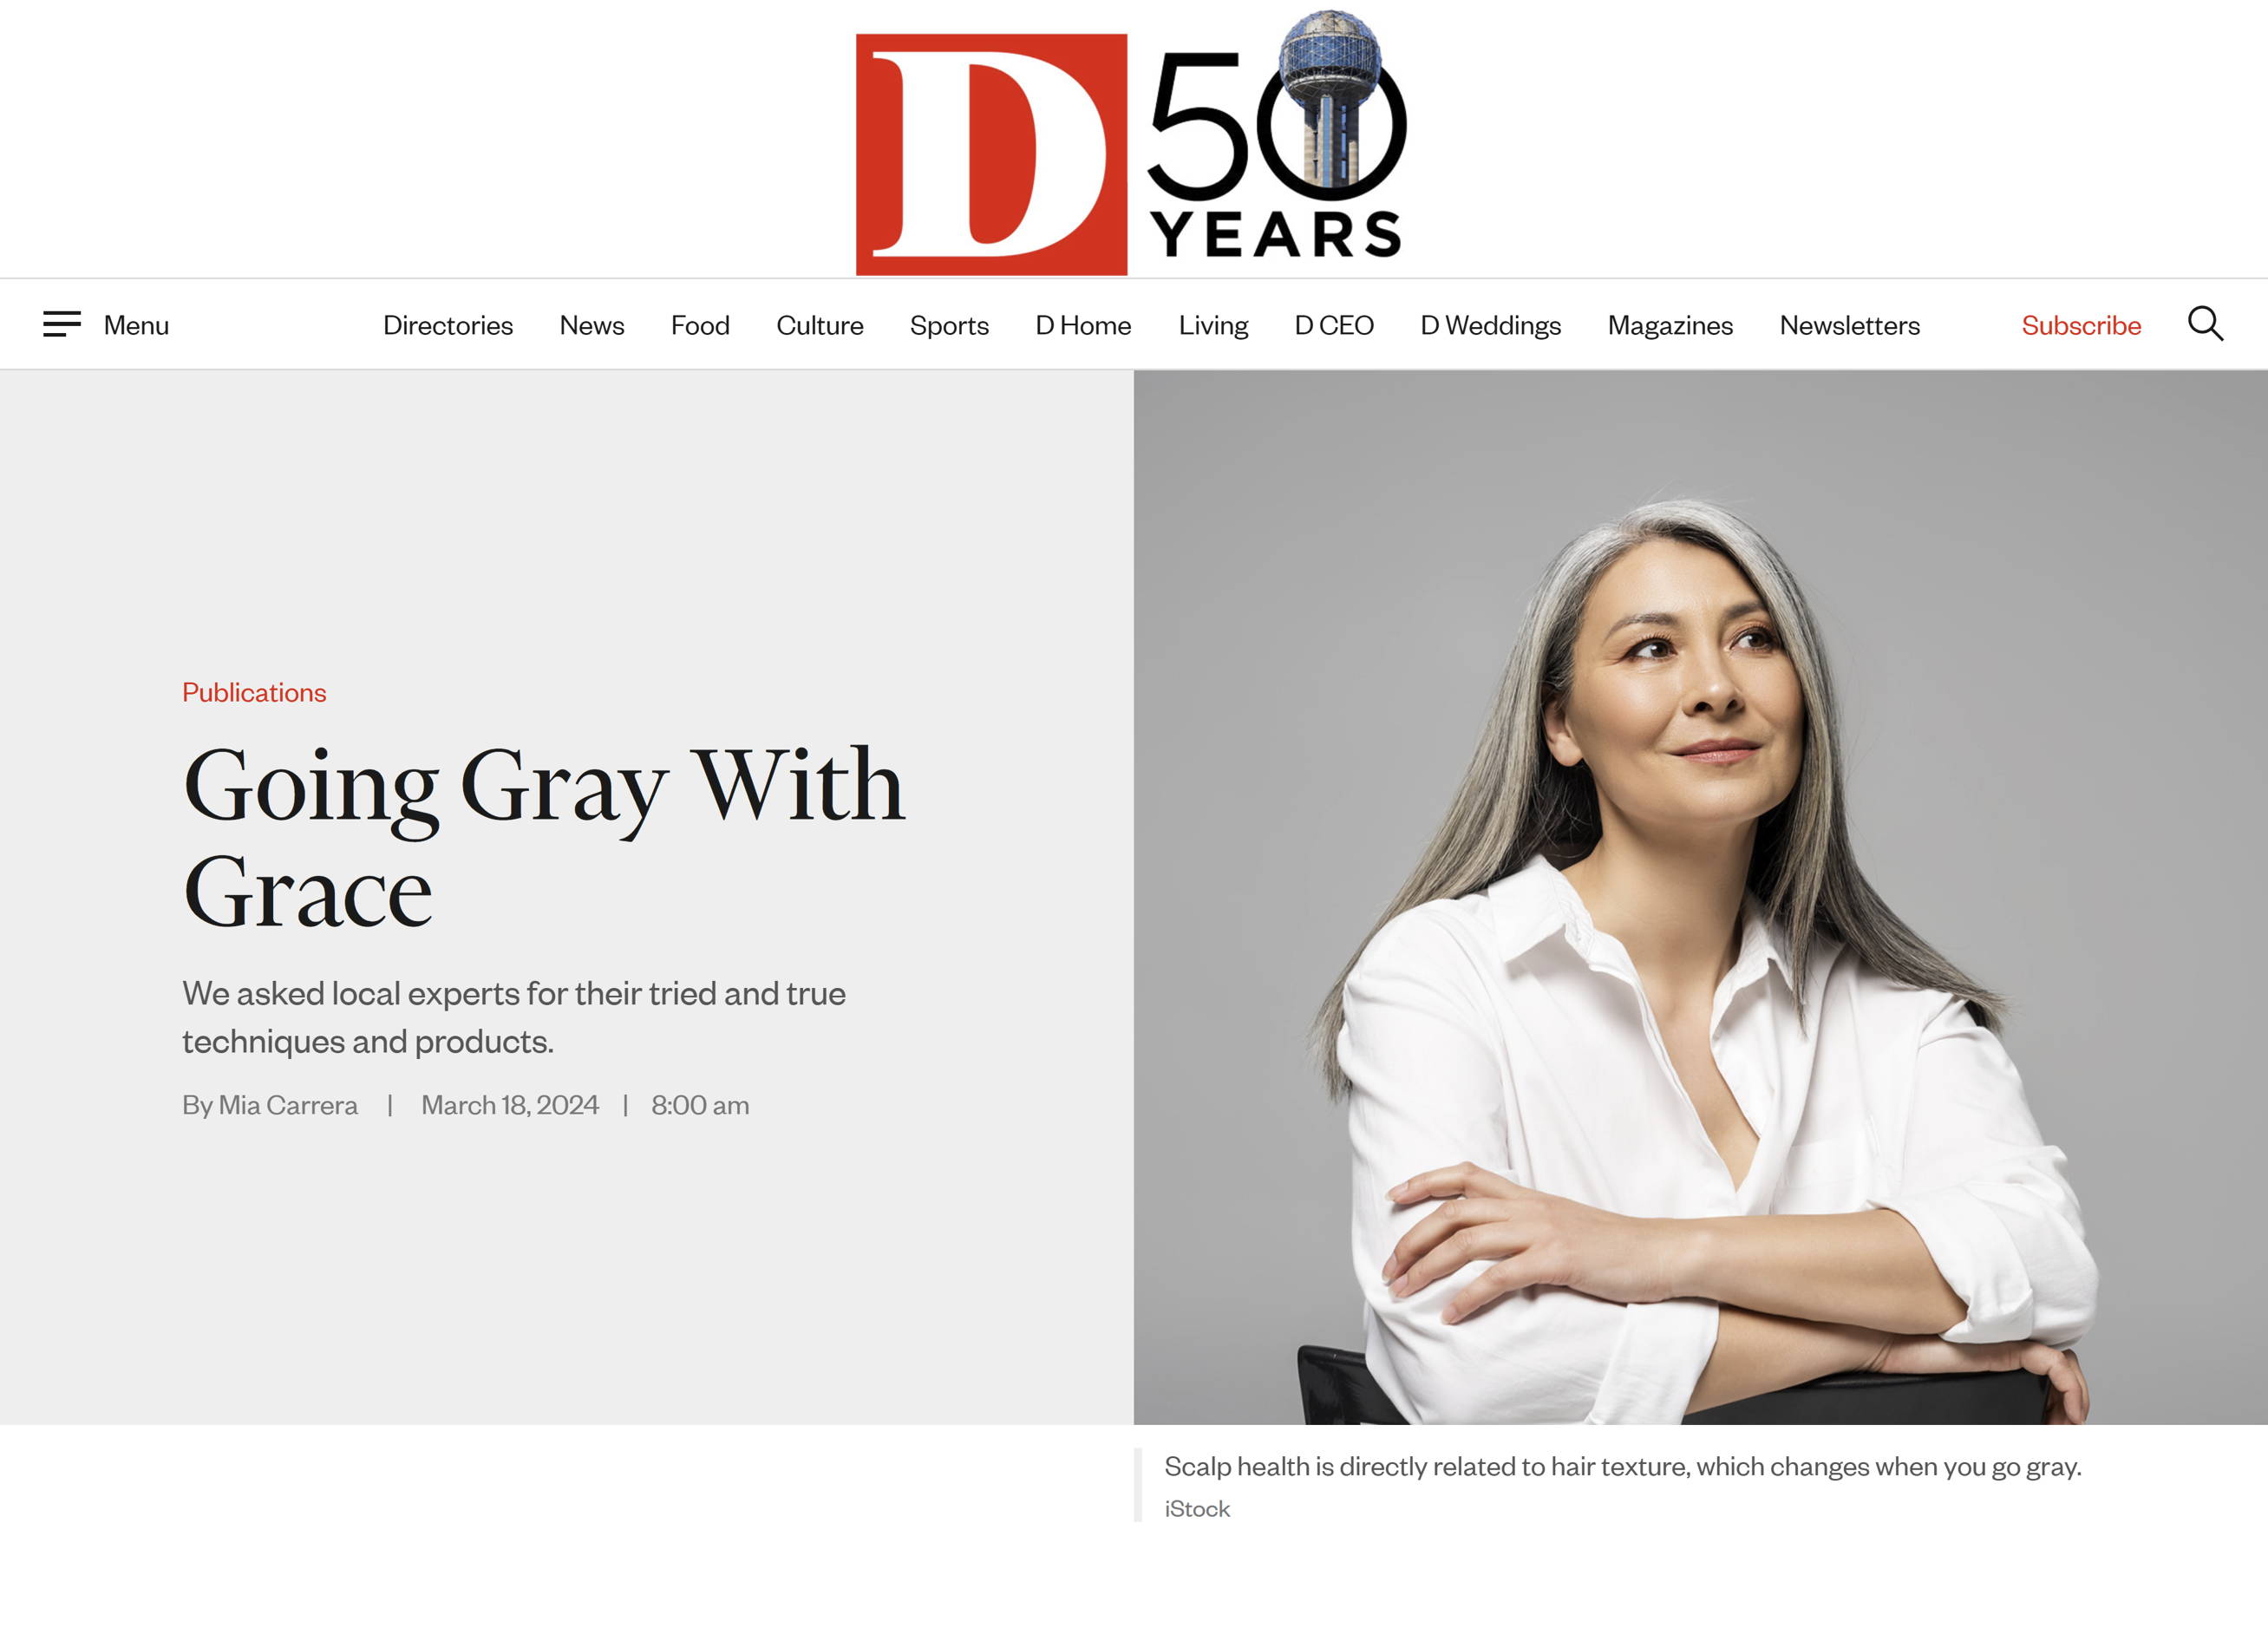 Going Gray with Grace